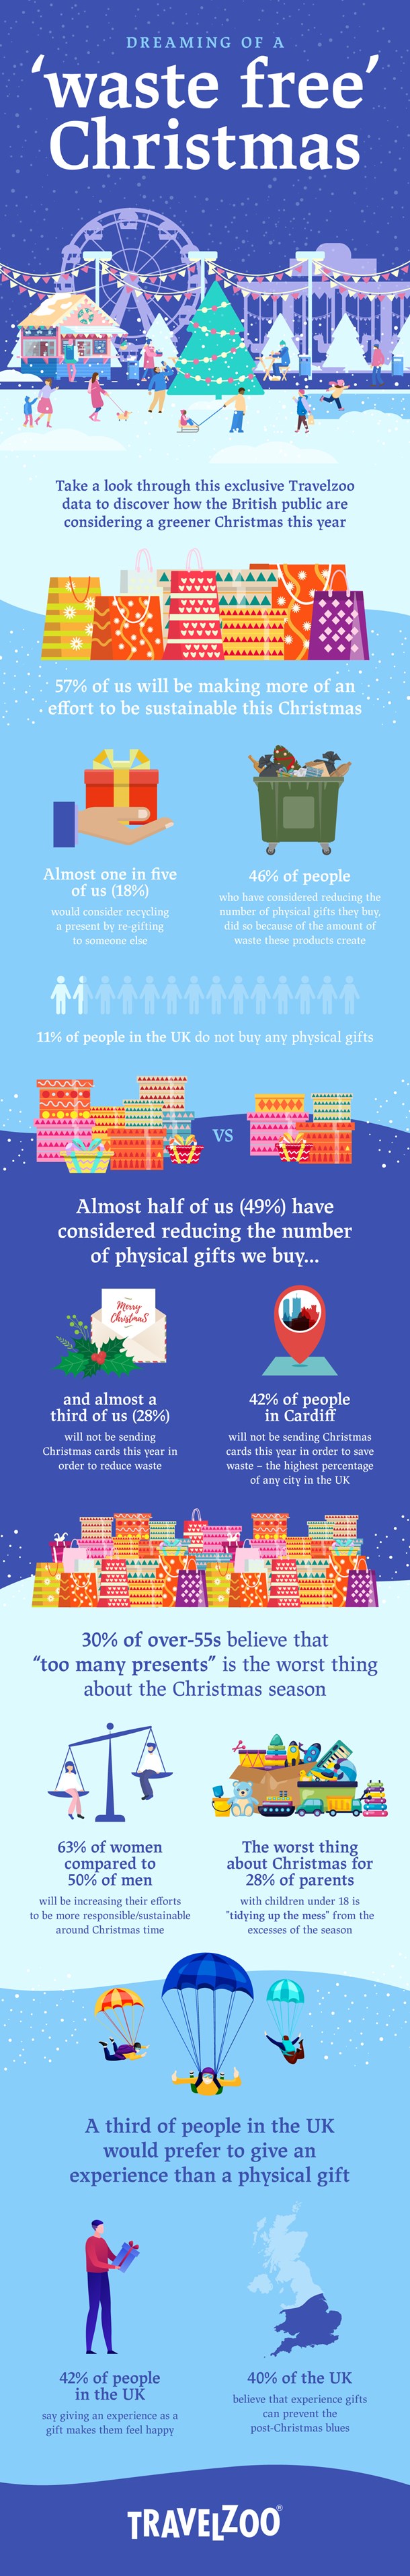 What does the UK think about Christmas waste?